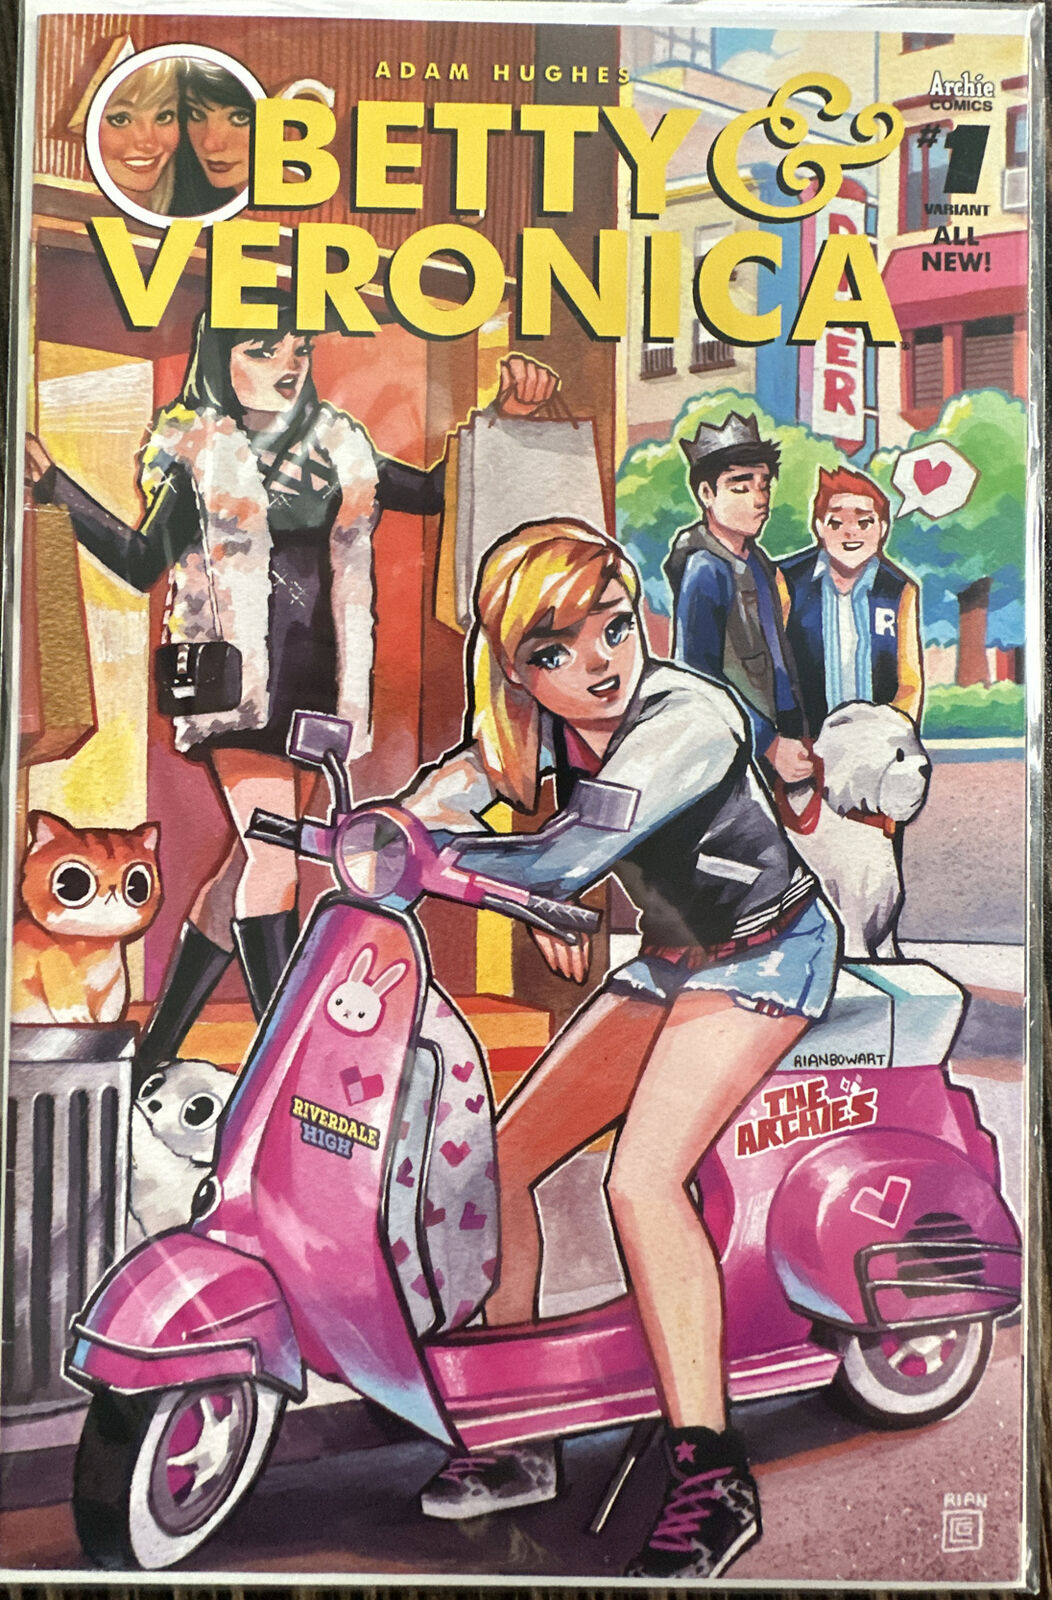 BETTY & Veronica Comic Issues #1 Variant All NEW Adam Hughes